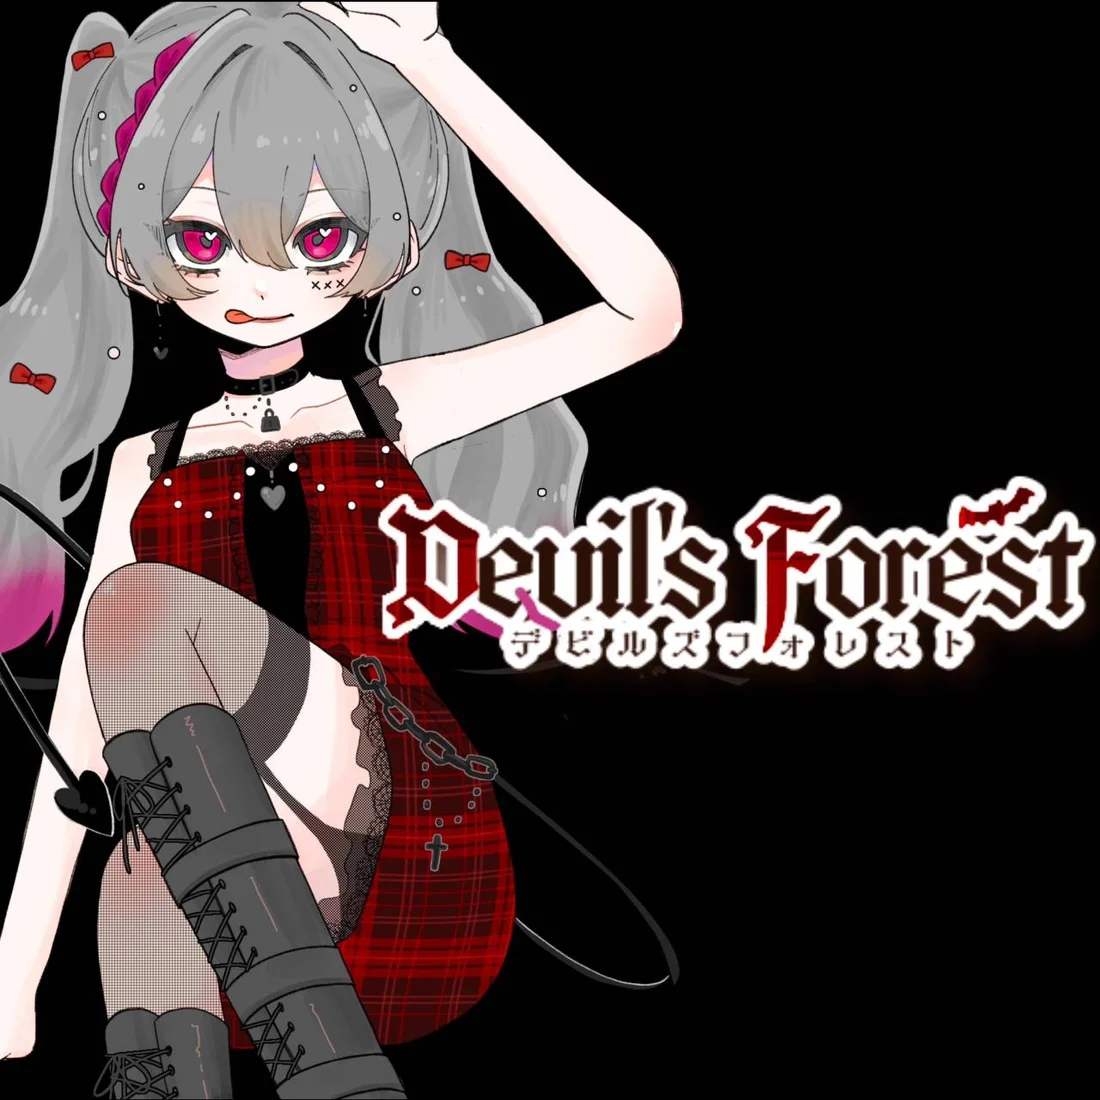 Devil’s forest